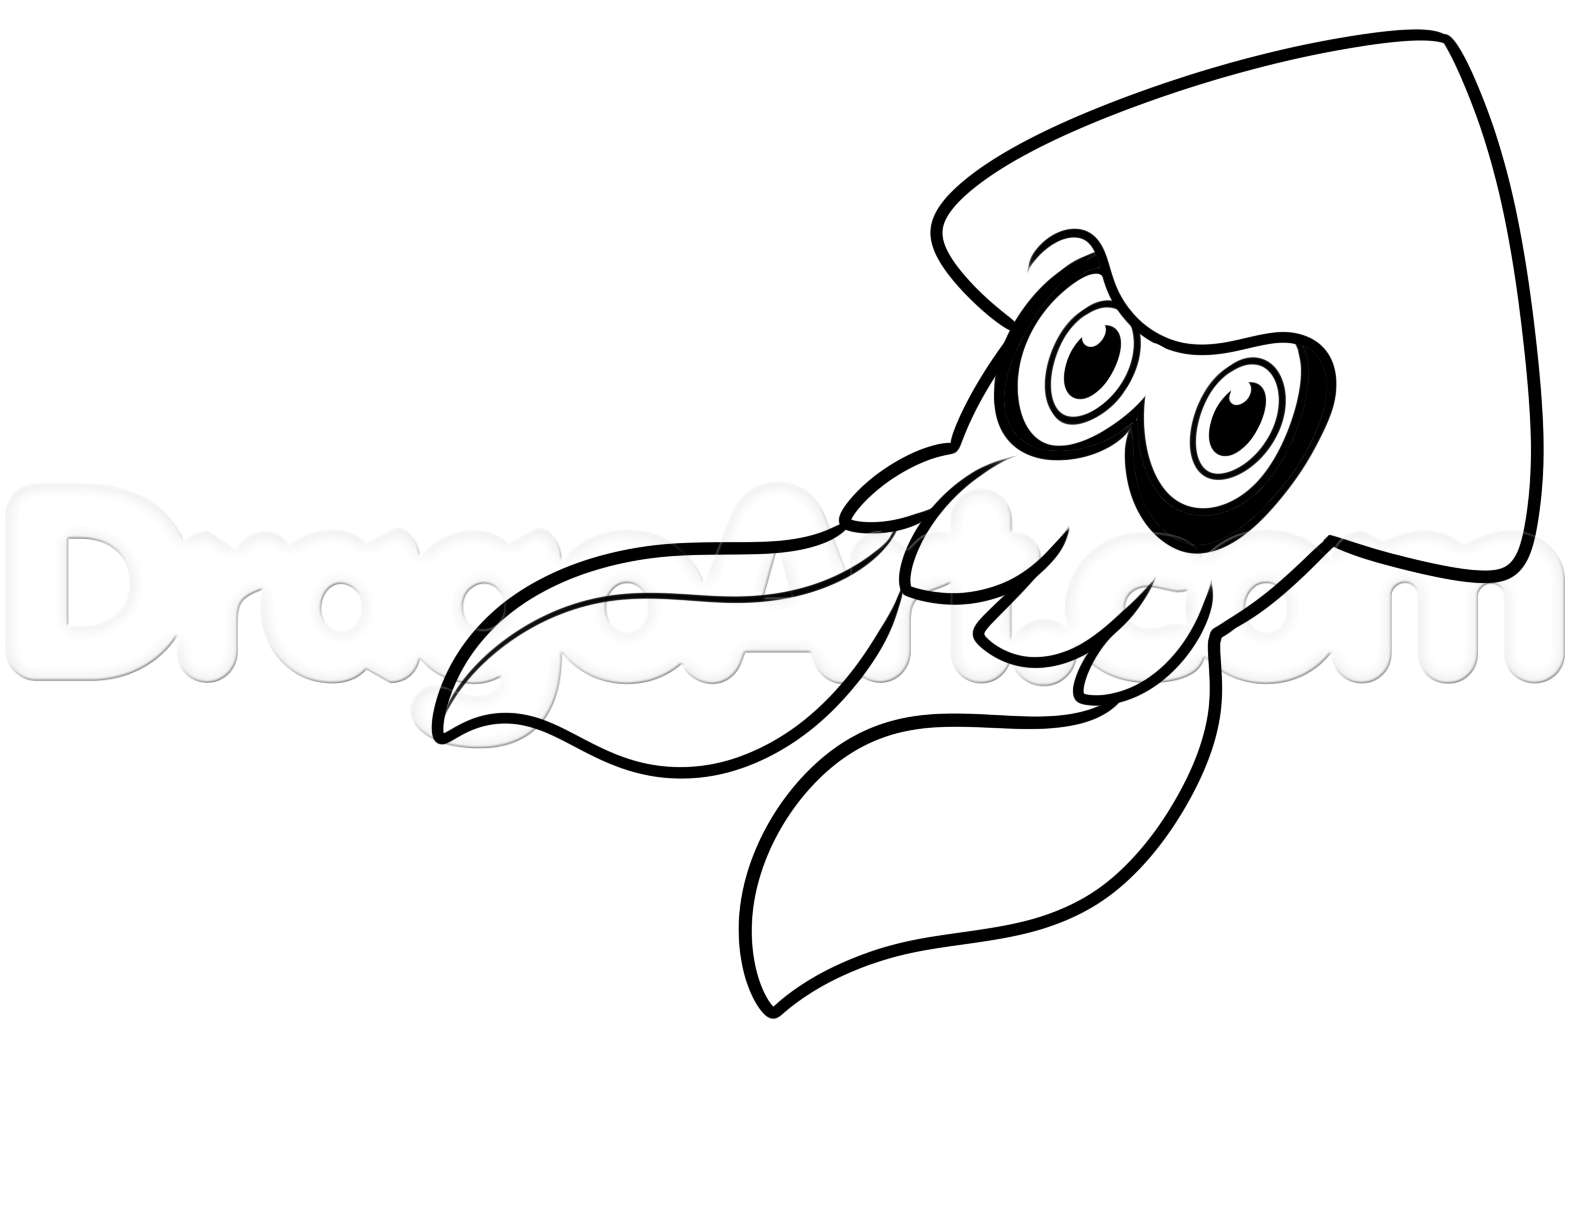 splatoon coloring pages all goggles chacters